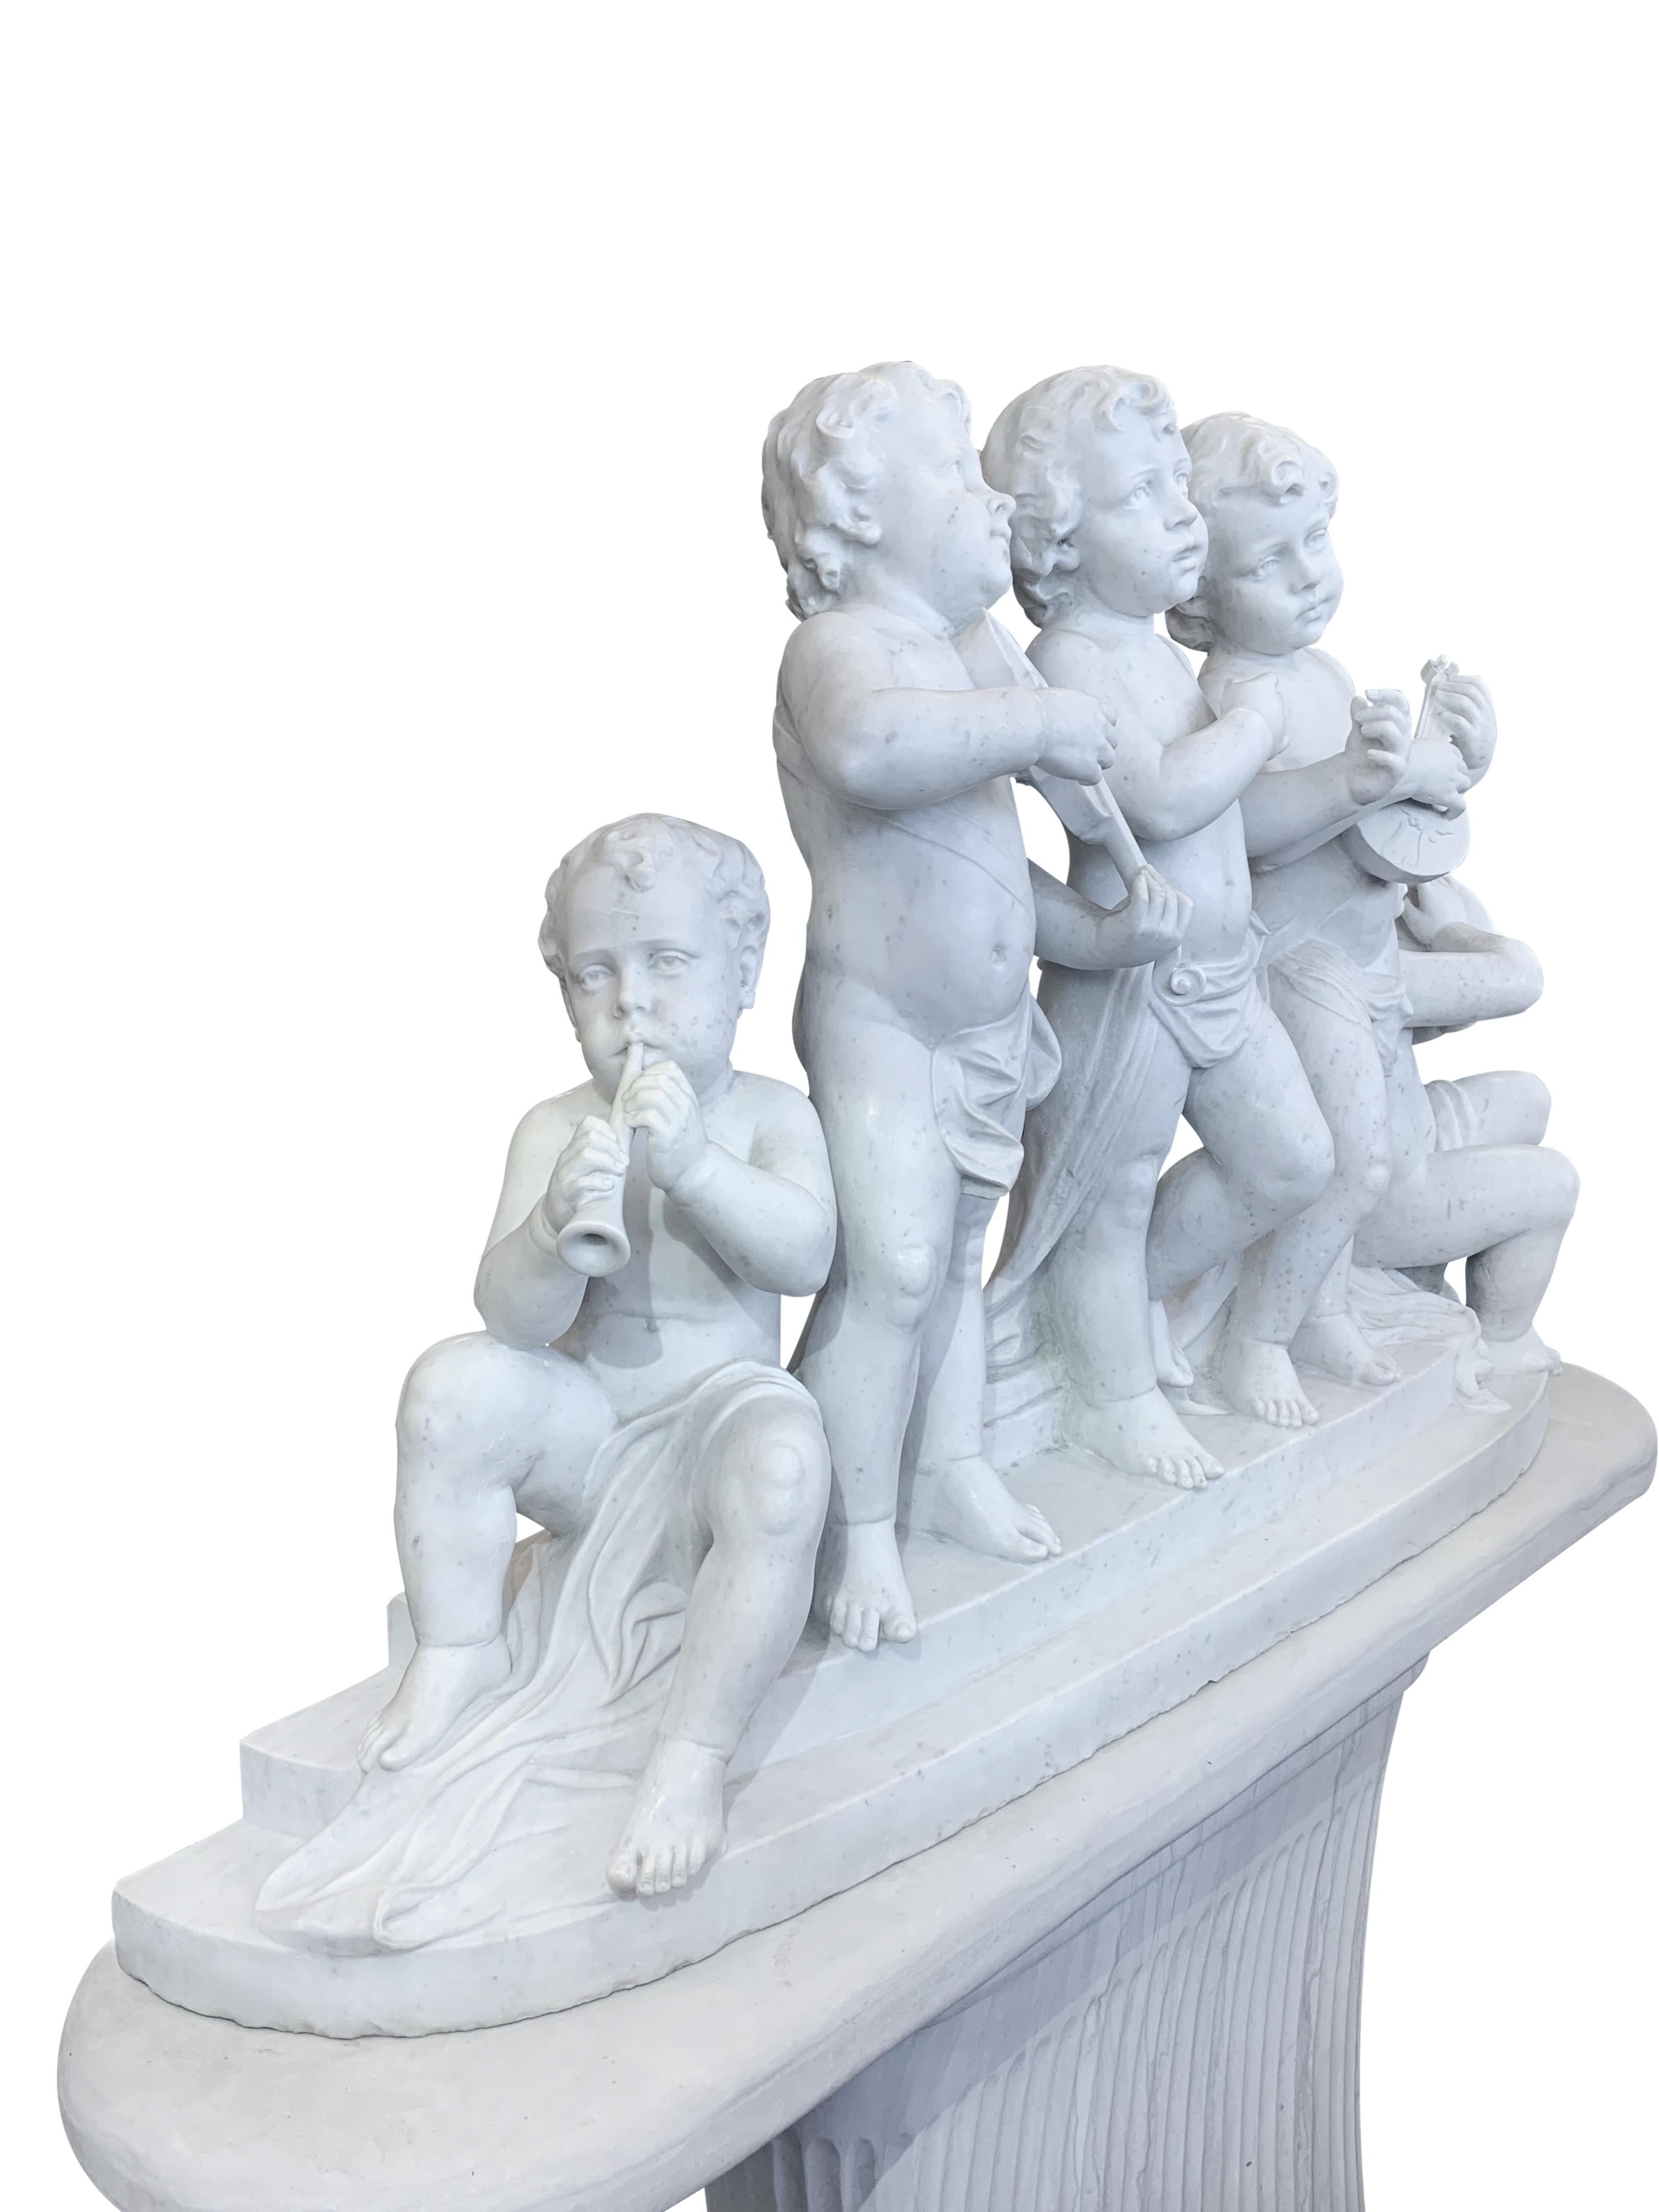 Large 19th Century Italian Carved Marble Group Depicting Musicians  on stand 7